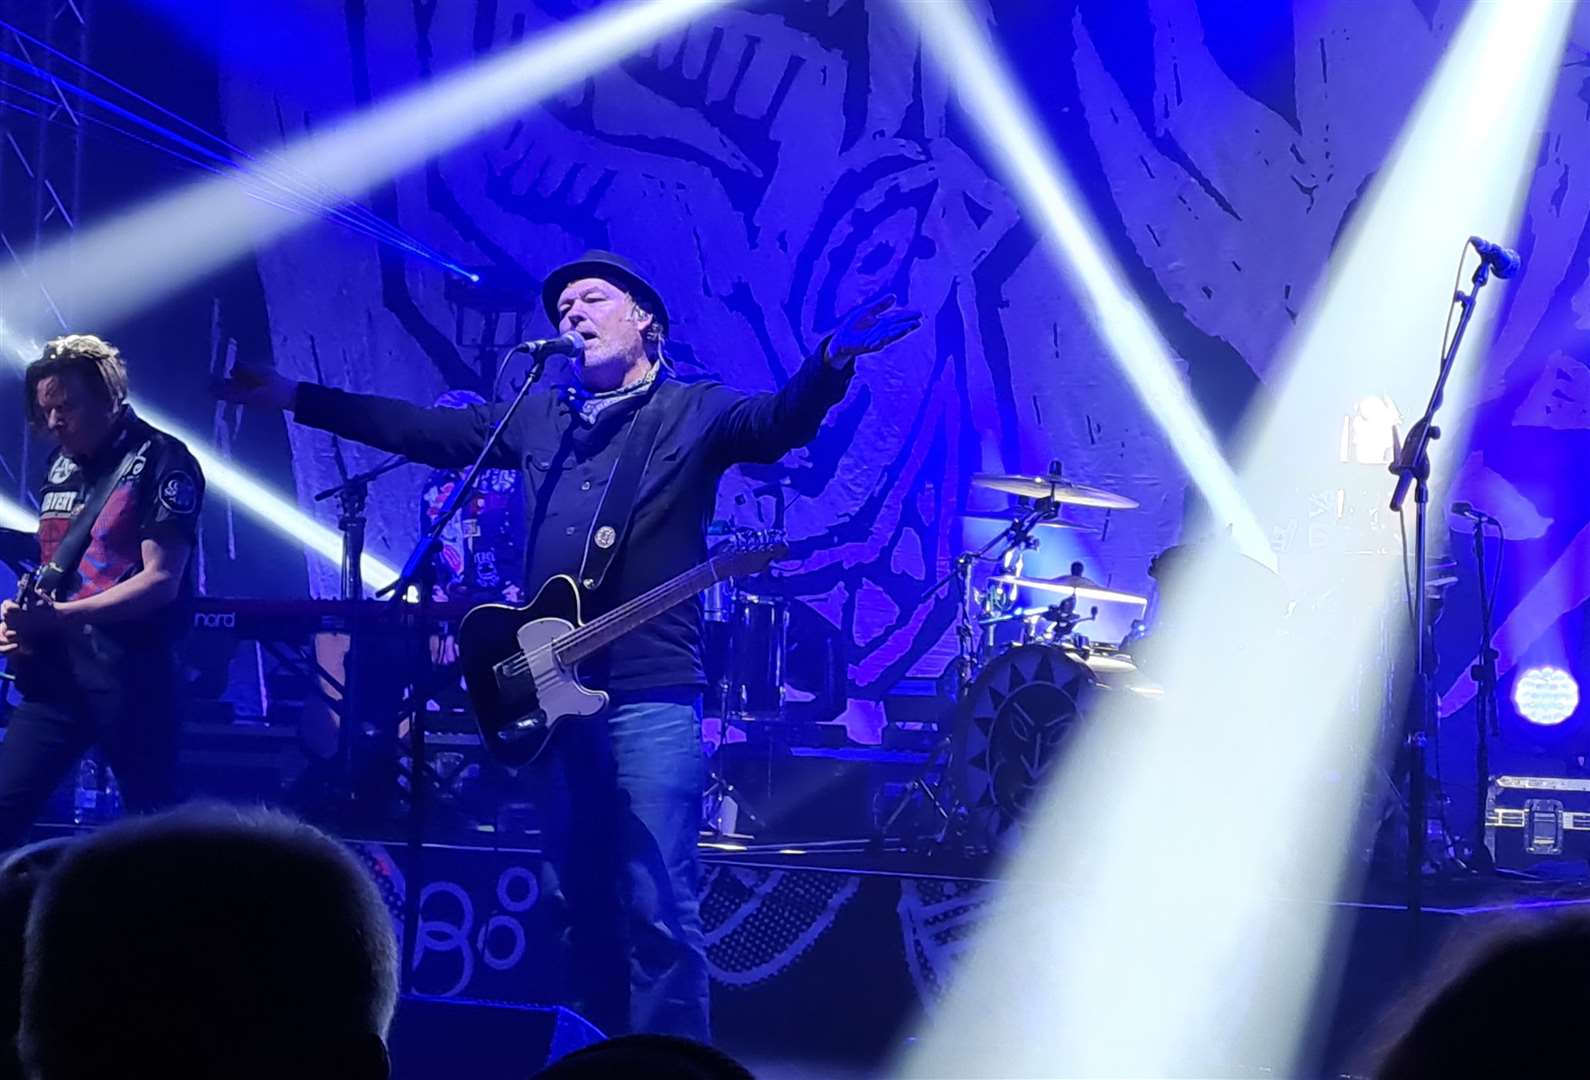 The Margate show was part of a 30-year anniversary tour for The Levellers classic Levelling the Land album